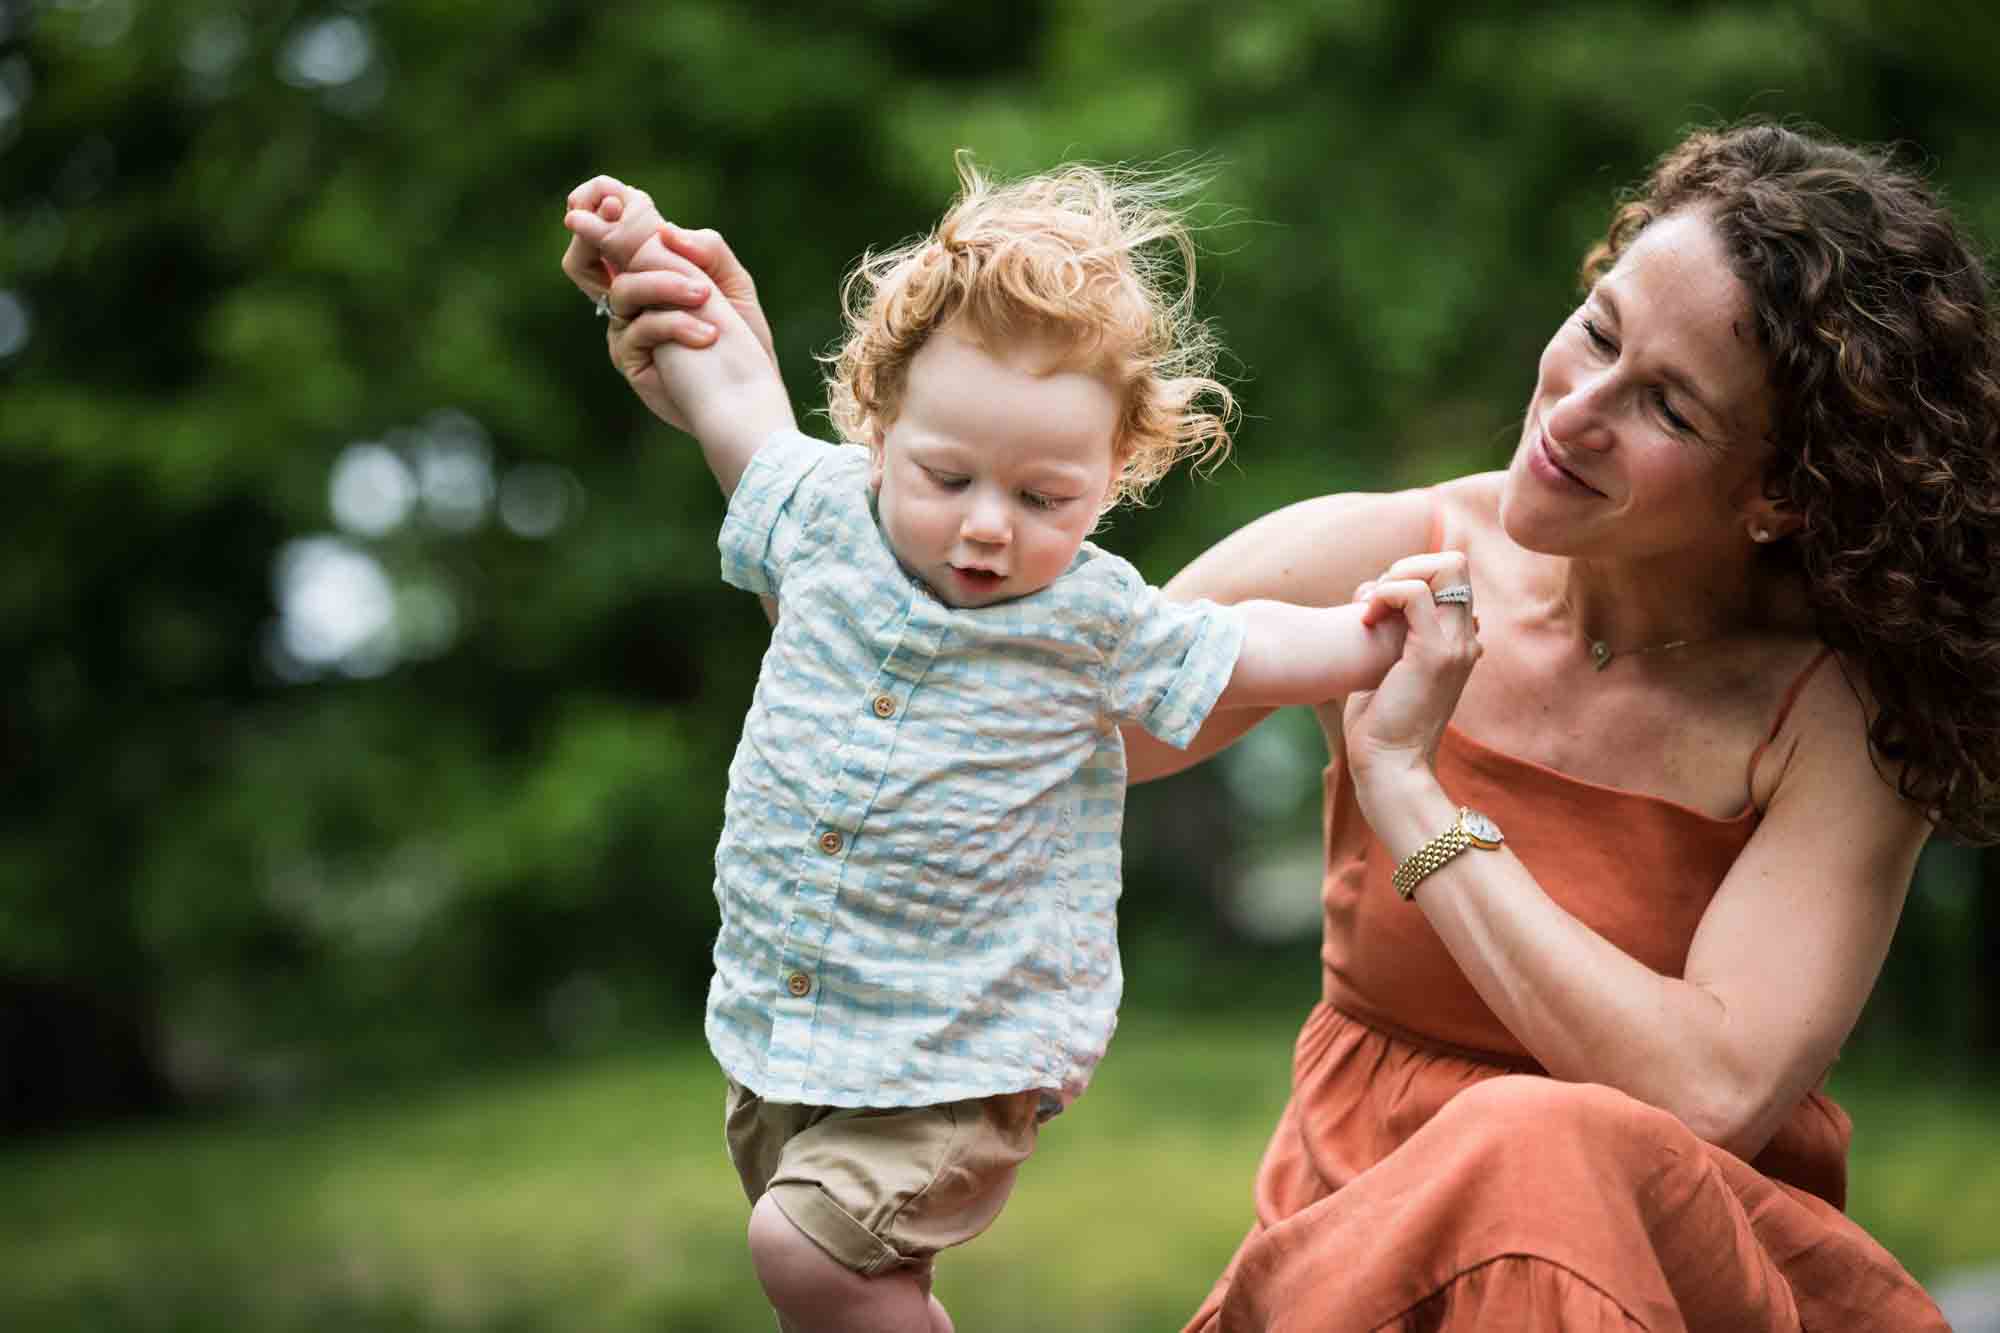 Mother wearing orange dress holding red-haired baby boy in front of trees during a Central Park family portrait session